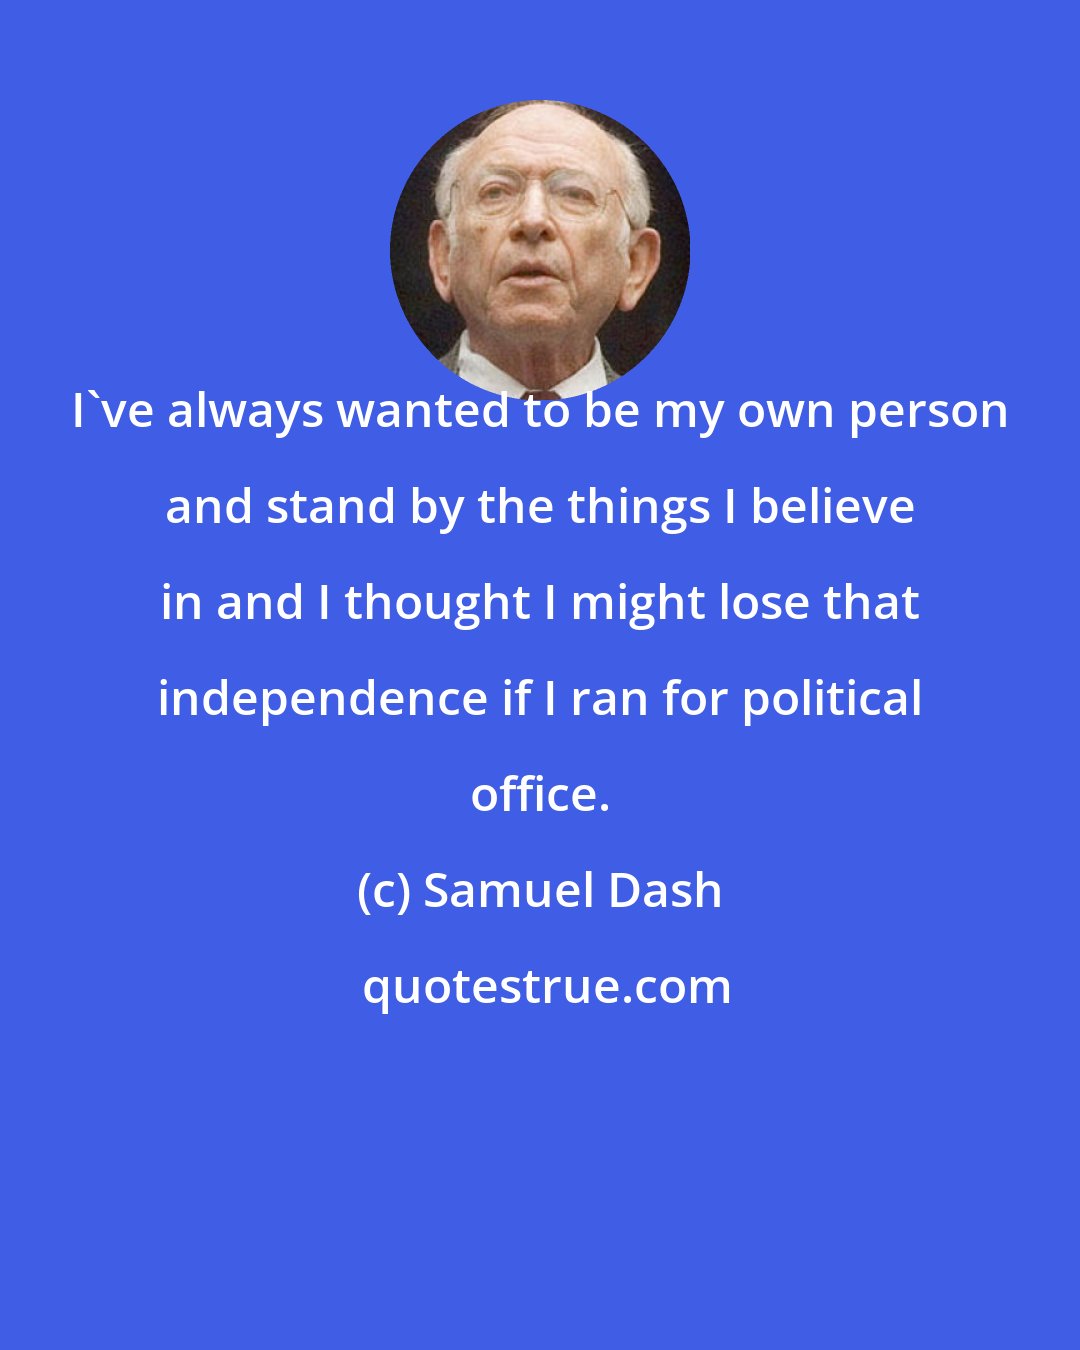 Samuel Dash: I've always wanted to be my own person and stand by the things I believe in and I thought I might lose that independence if I ran for political office.